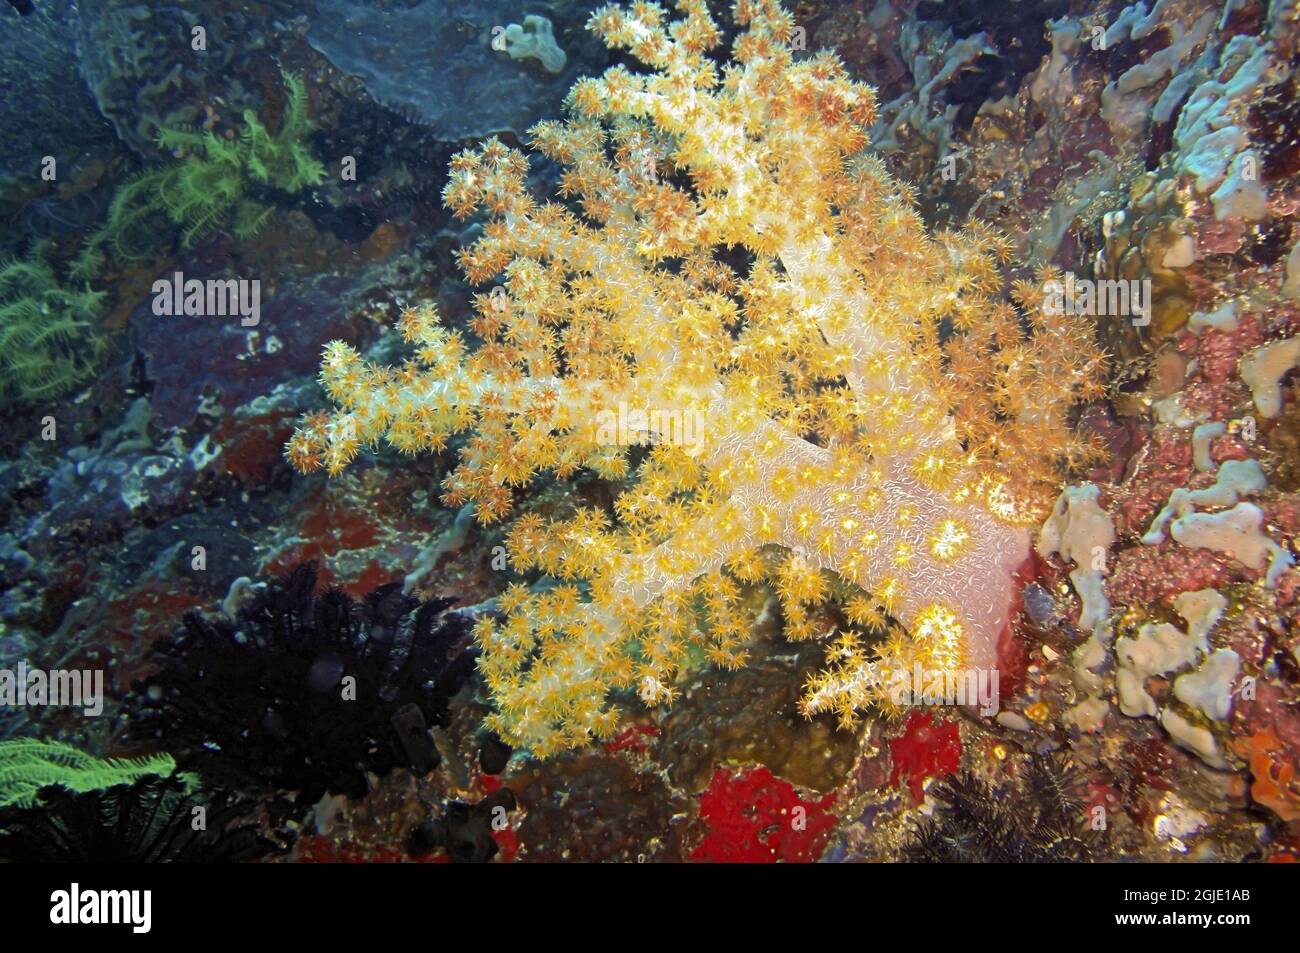 Colorful soft coral on the ground in the filipino sea January 19, 2012 Stock Photo